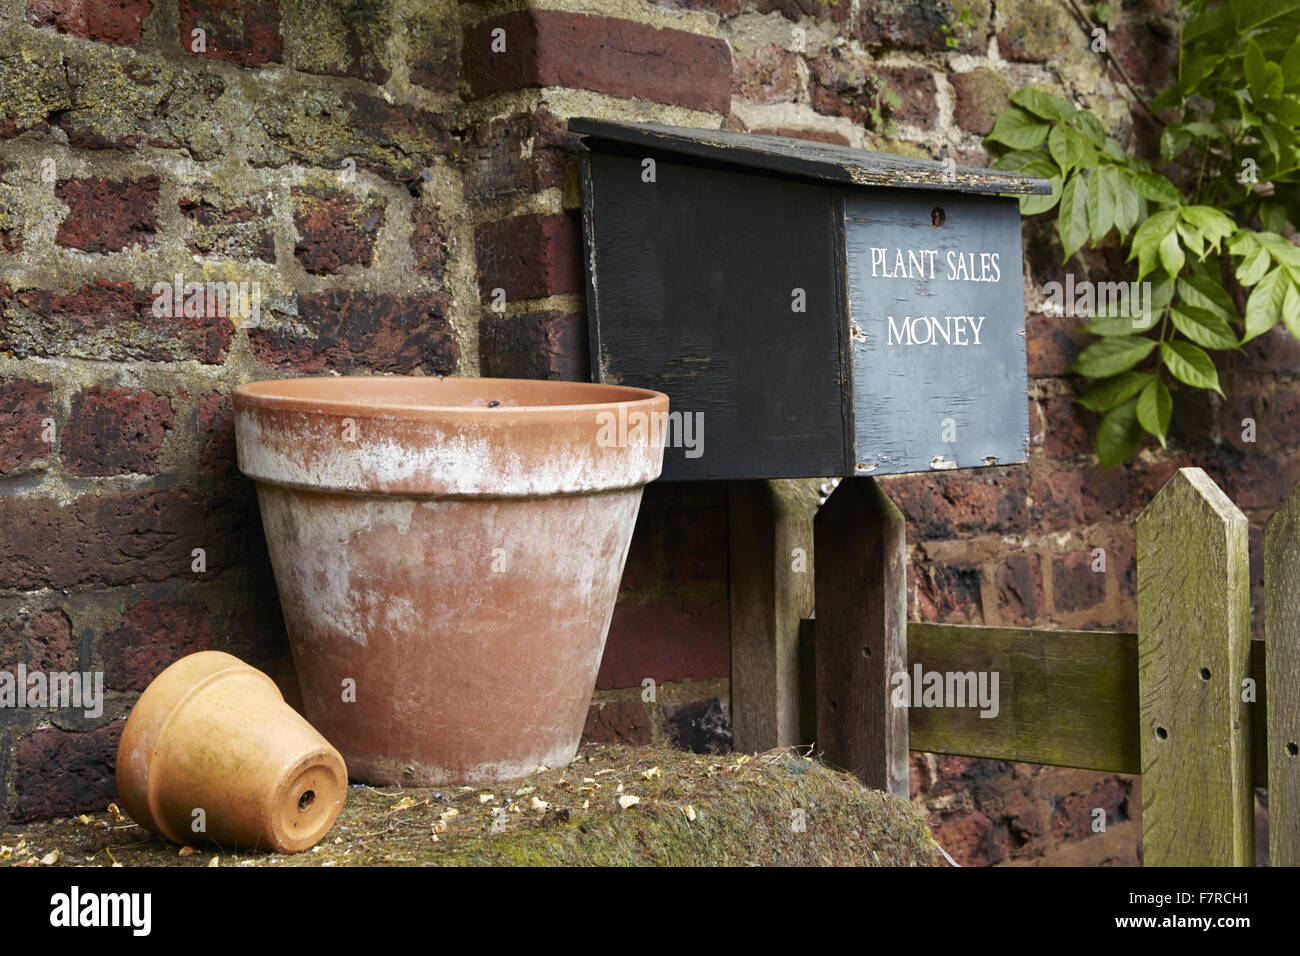 An honesty box in the garden at Fenton House and Garden, London. Fenton House was built in 1686 and is filled with world-class decorative and fine art collections. The gardens include an orchard, kitchen garden, rose garden and formal terraces and lawns. Stock Photo